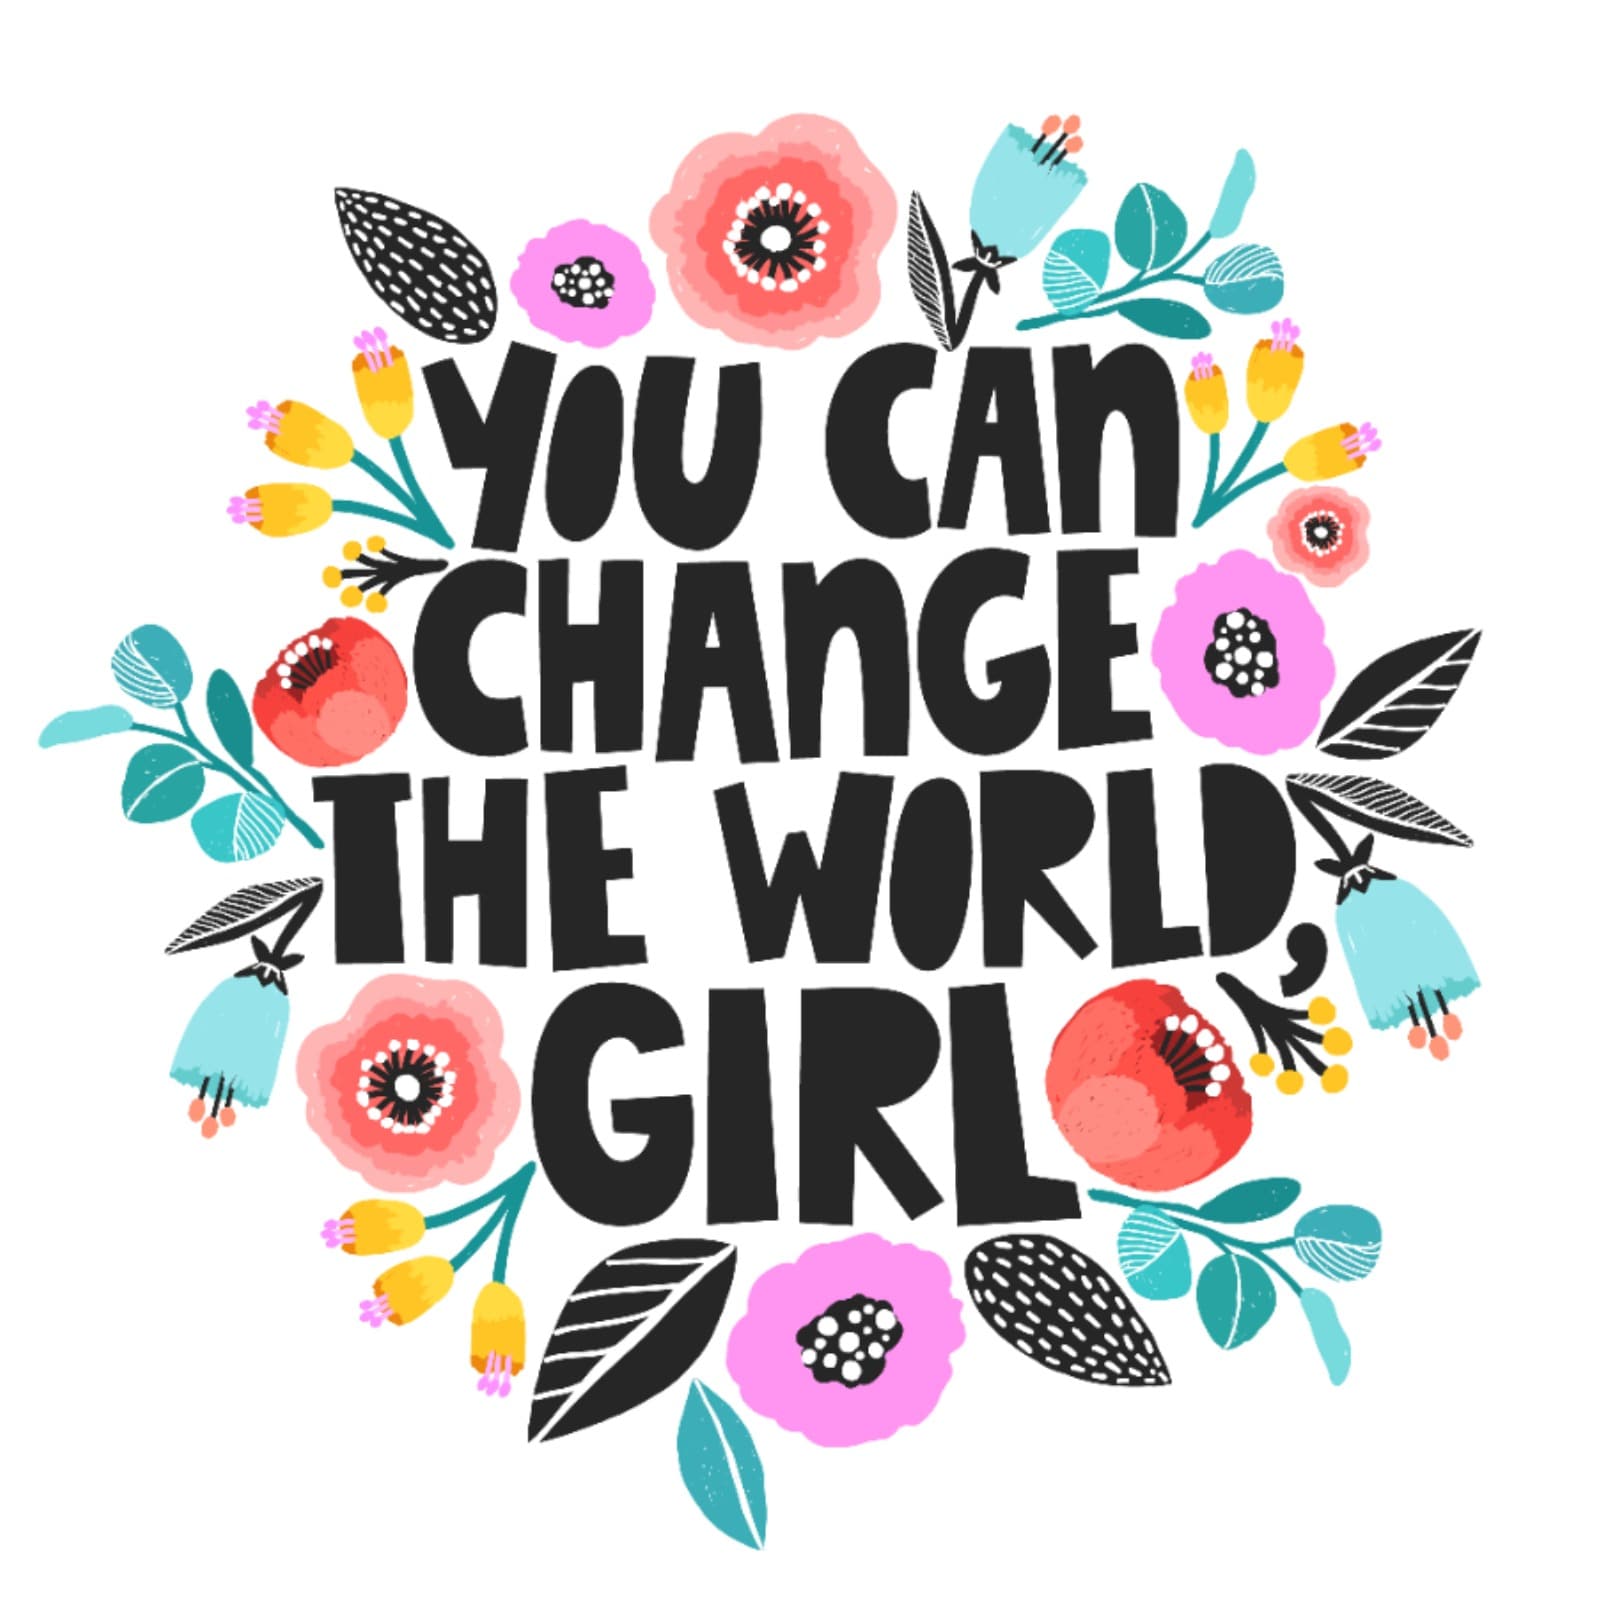 Happy International Day of the Girl Child 2022: Images, Wishes, Quotes, Messages and WhatsApp Greetings to Share. (Image: Shutterstock)